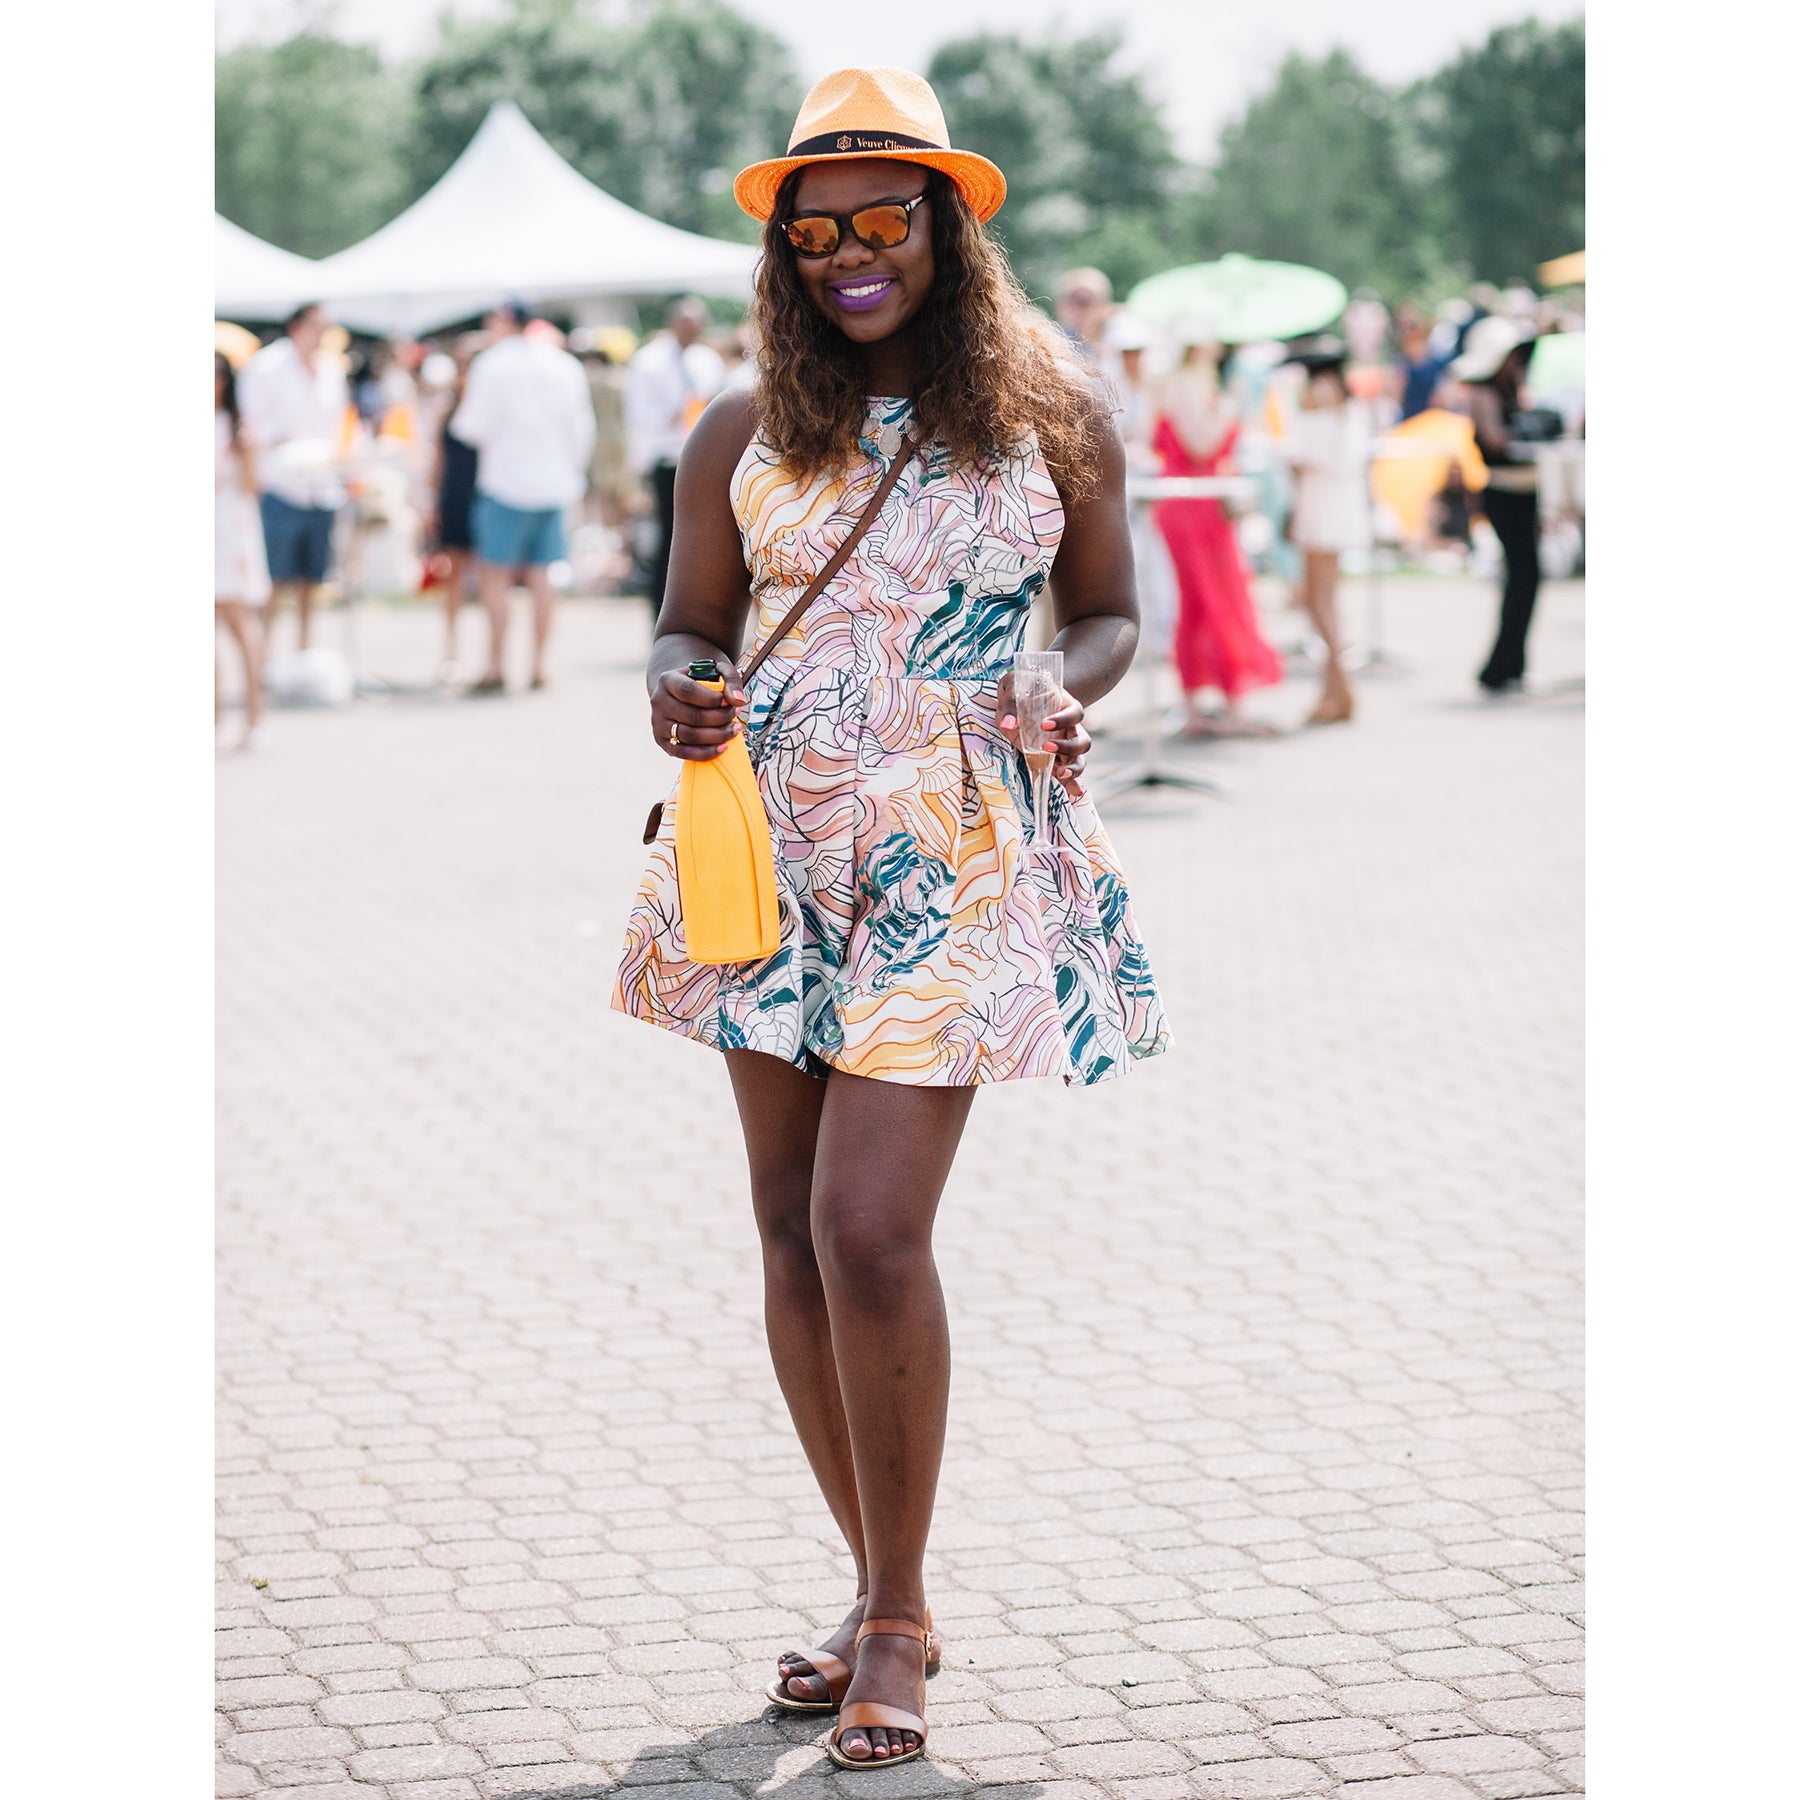 Chic Style at the Veuve Cliquot Polo Classic
